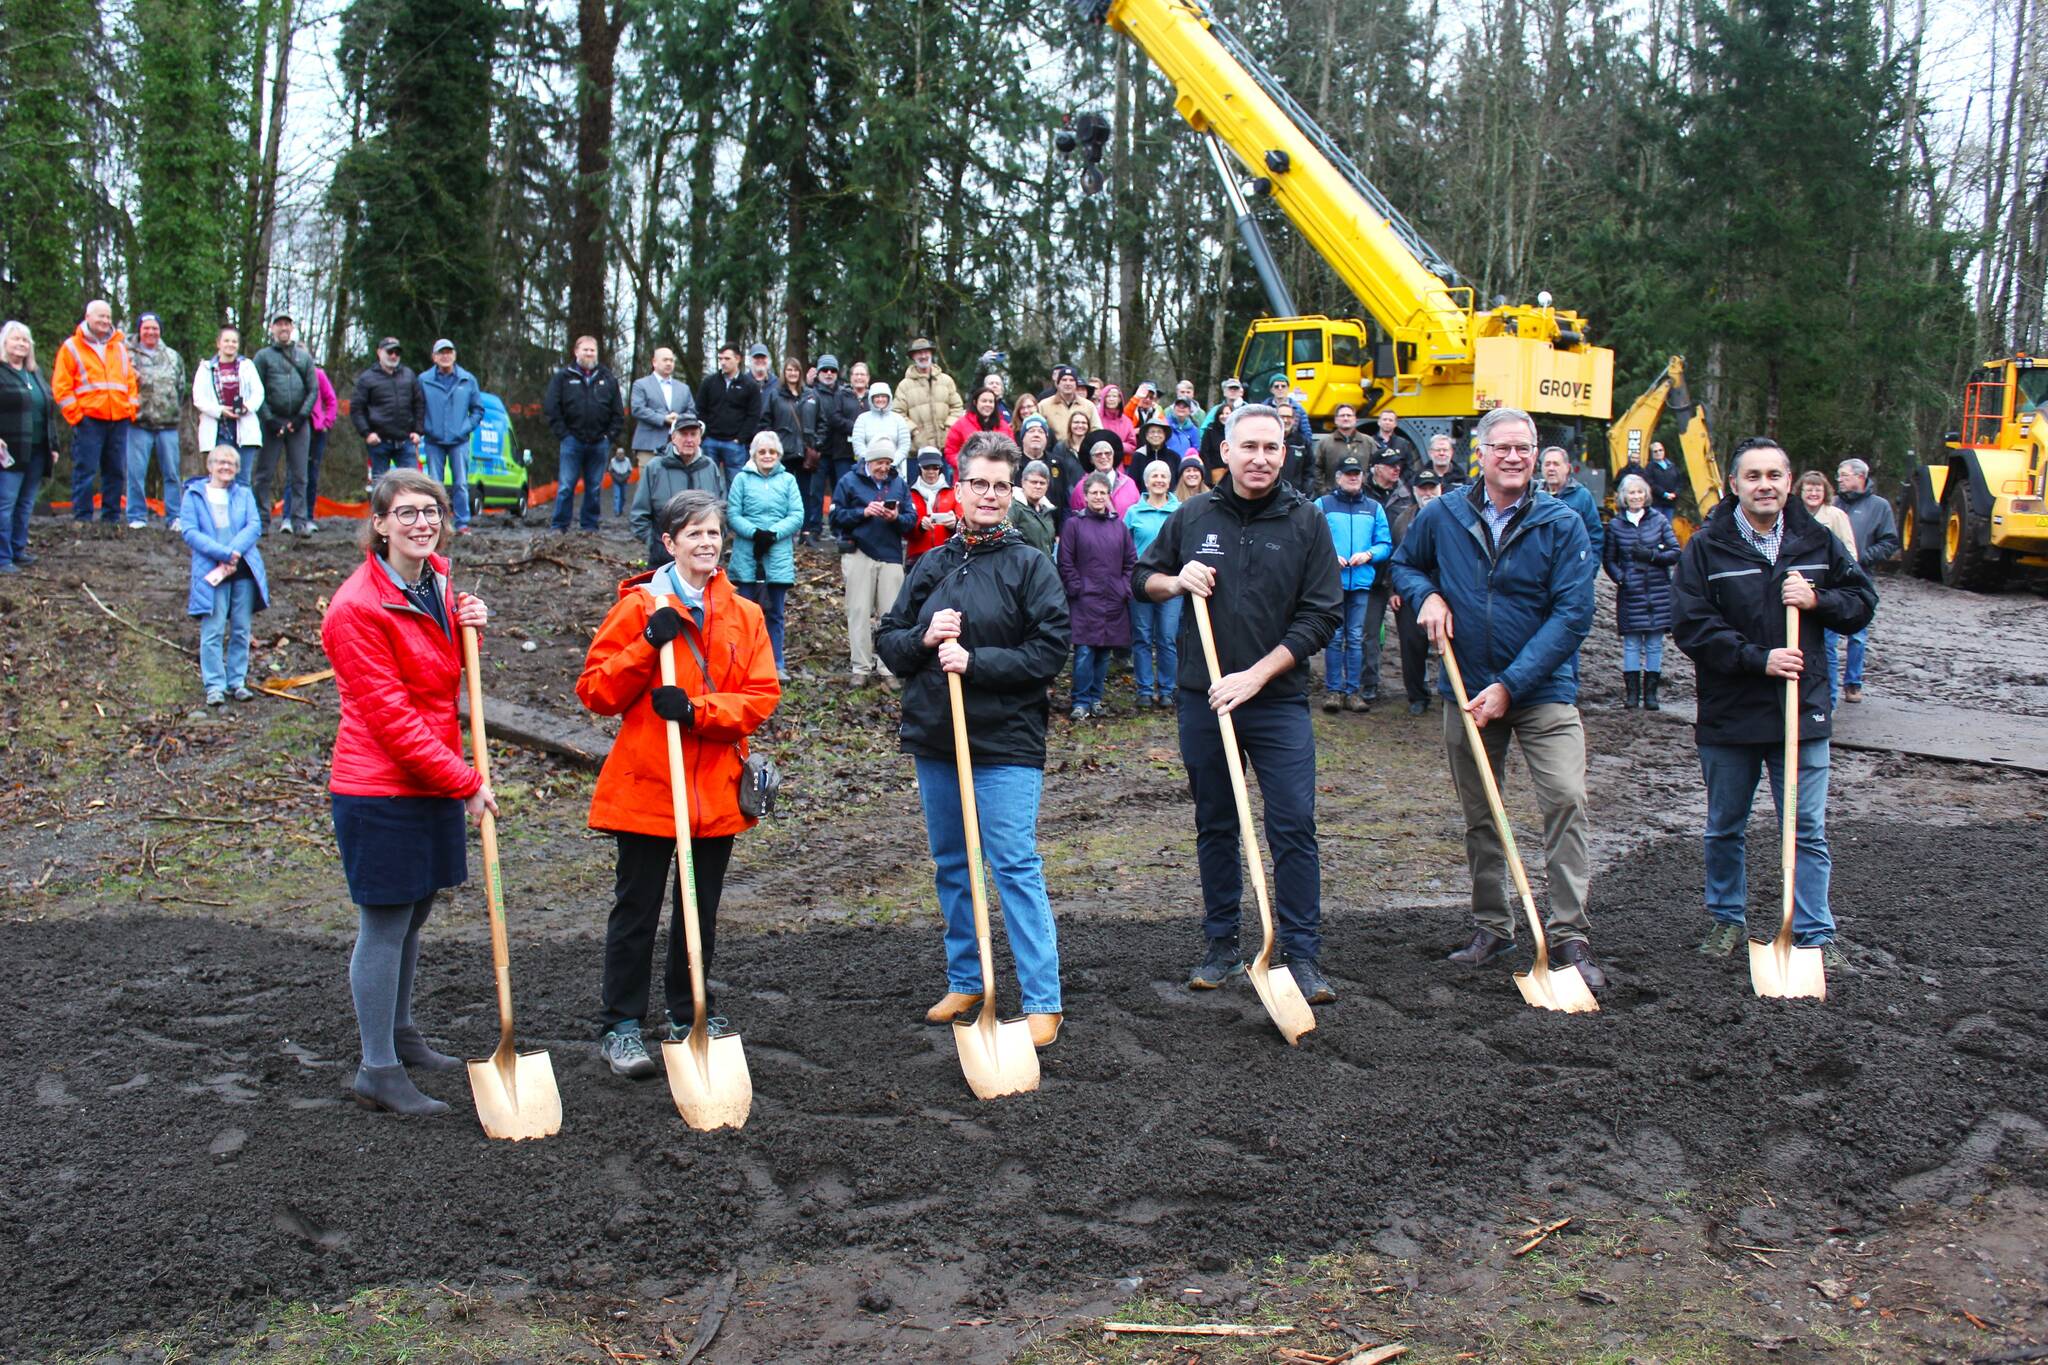 Foothills Rails to Trails Executive Director Shayla Miles, former Buckley Mayor Pat Johnson, former Enumclaw Mayor Liz Reynolds, King County Executive Dow Constantine, Pierce County Executive Bruce Dammeier, and King County Parks and Rec Director Warren Jimenez pose with their ceremonial shovels in front of the crowd gathered at the groundbreaking. Photo by Ray Miller-Still